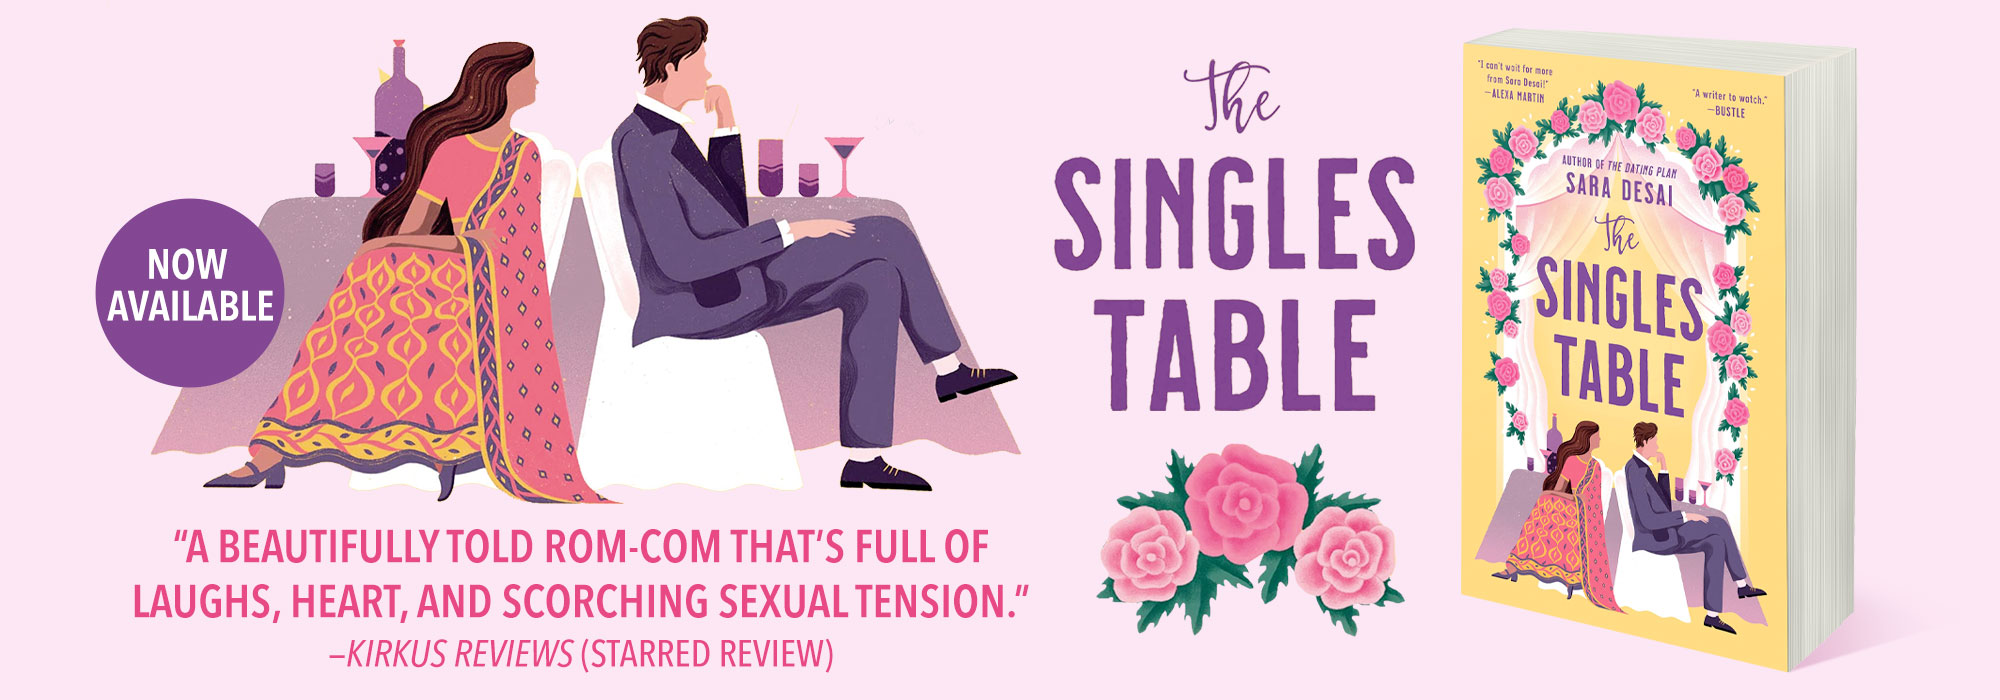 Now Available: The Singles Table